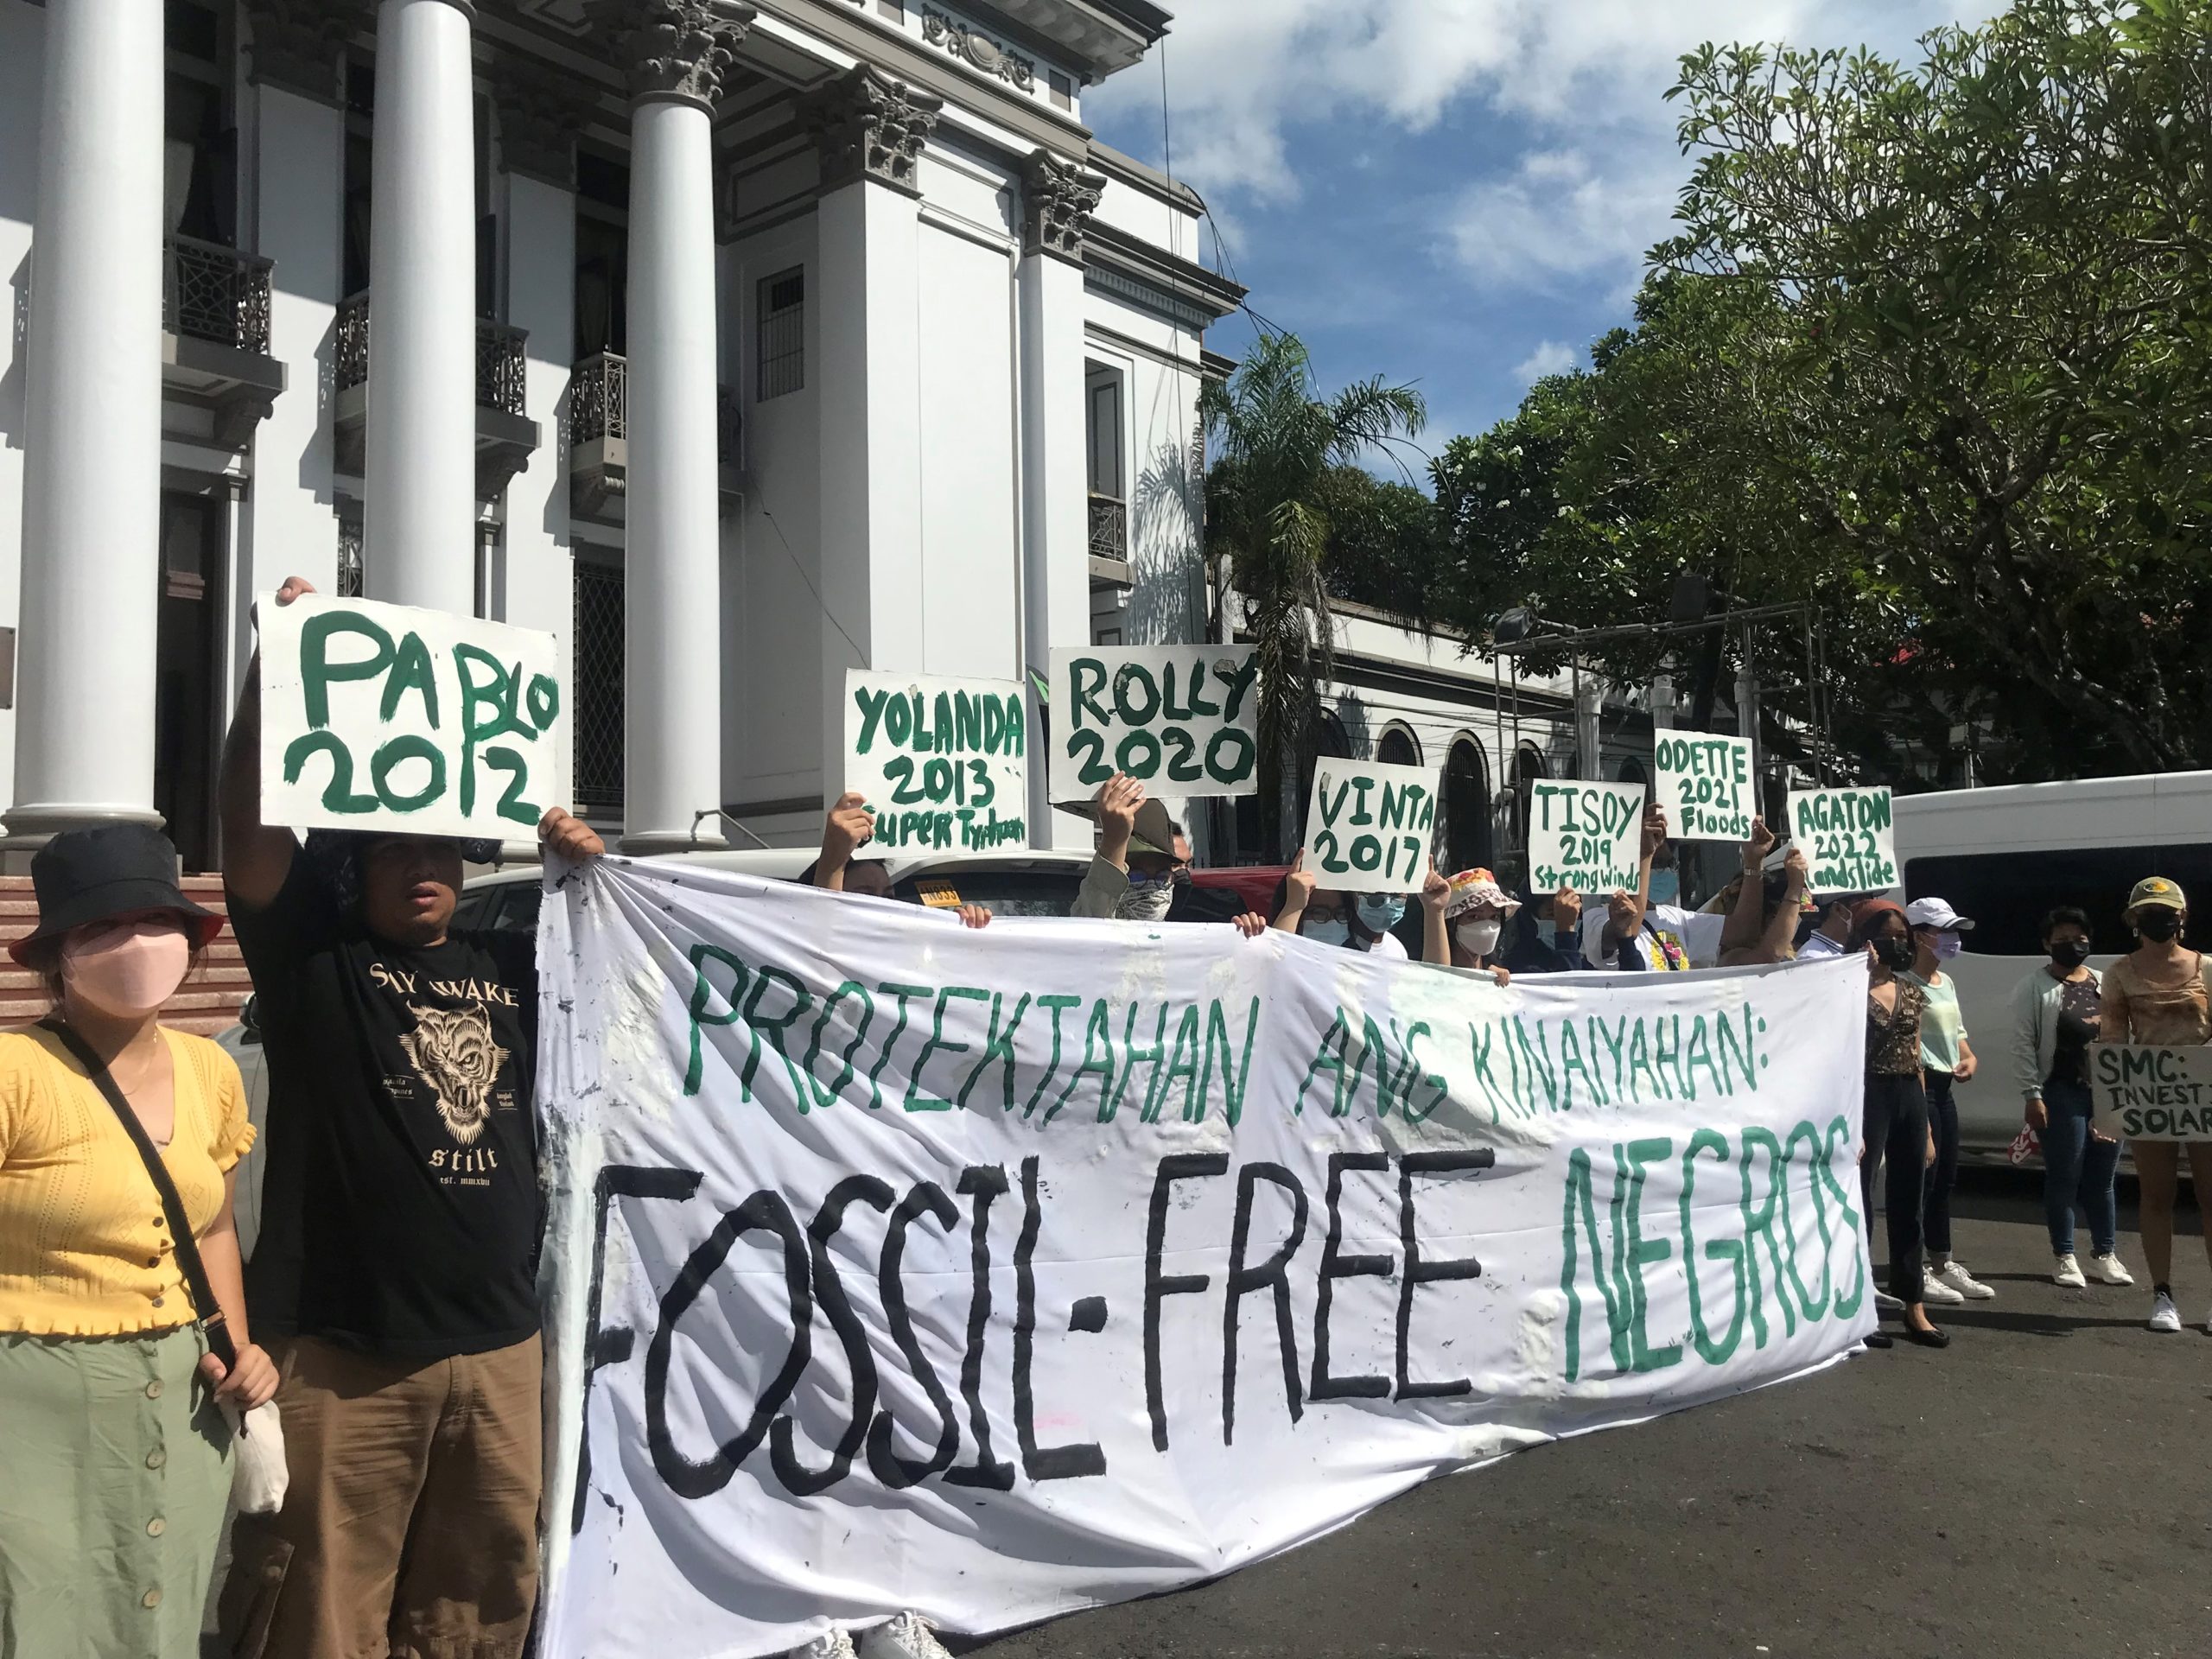 A silent protest was held by different groups at the Negros Occidental Capitol in Bacolod City on Earth Day, April 22